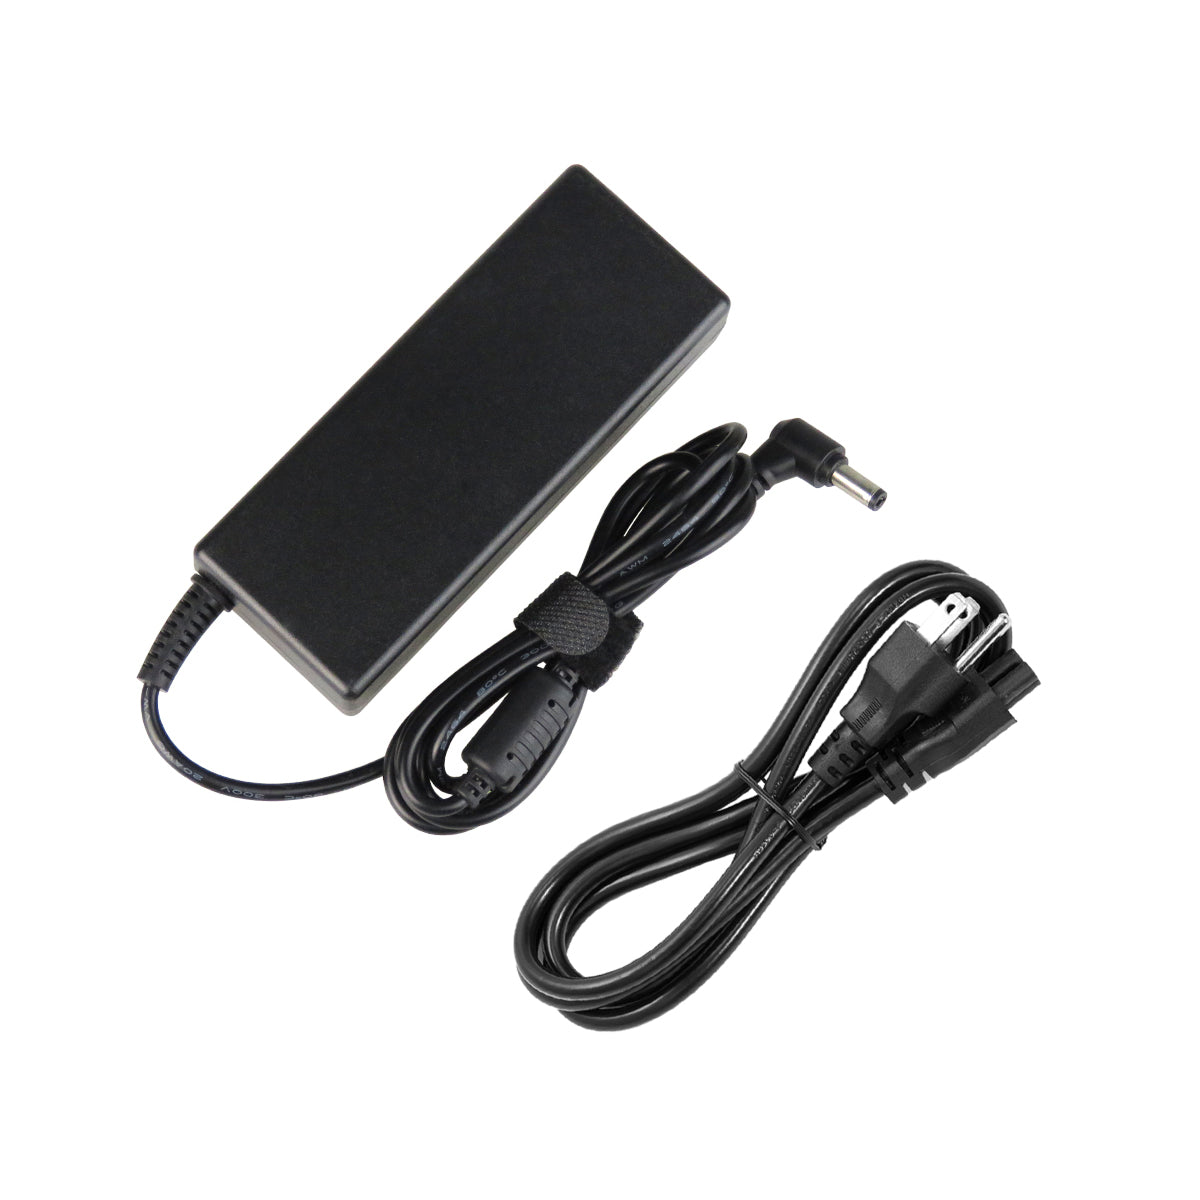 AC Adapter Charger for ASUS K65R Laptop.